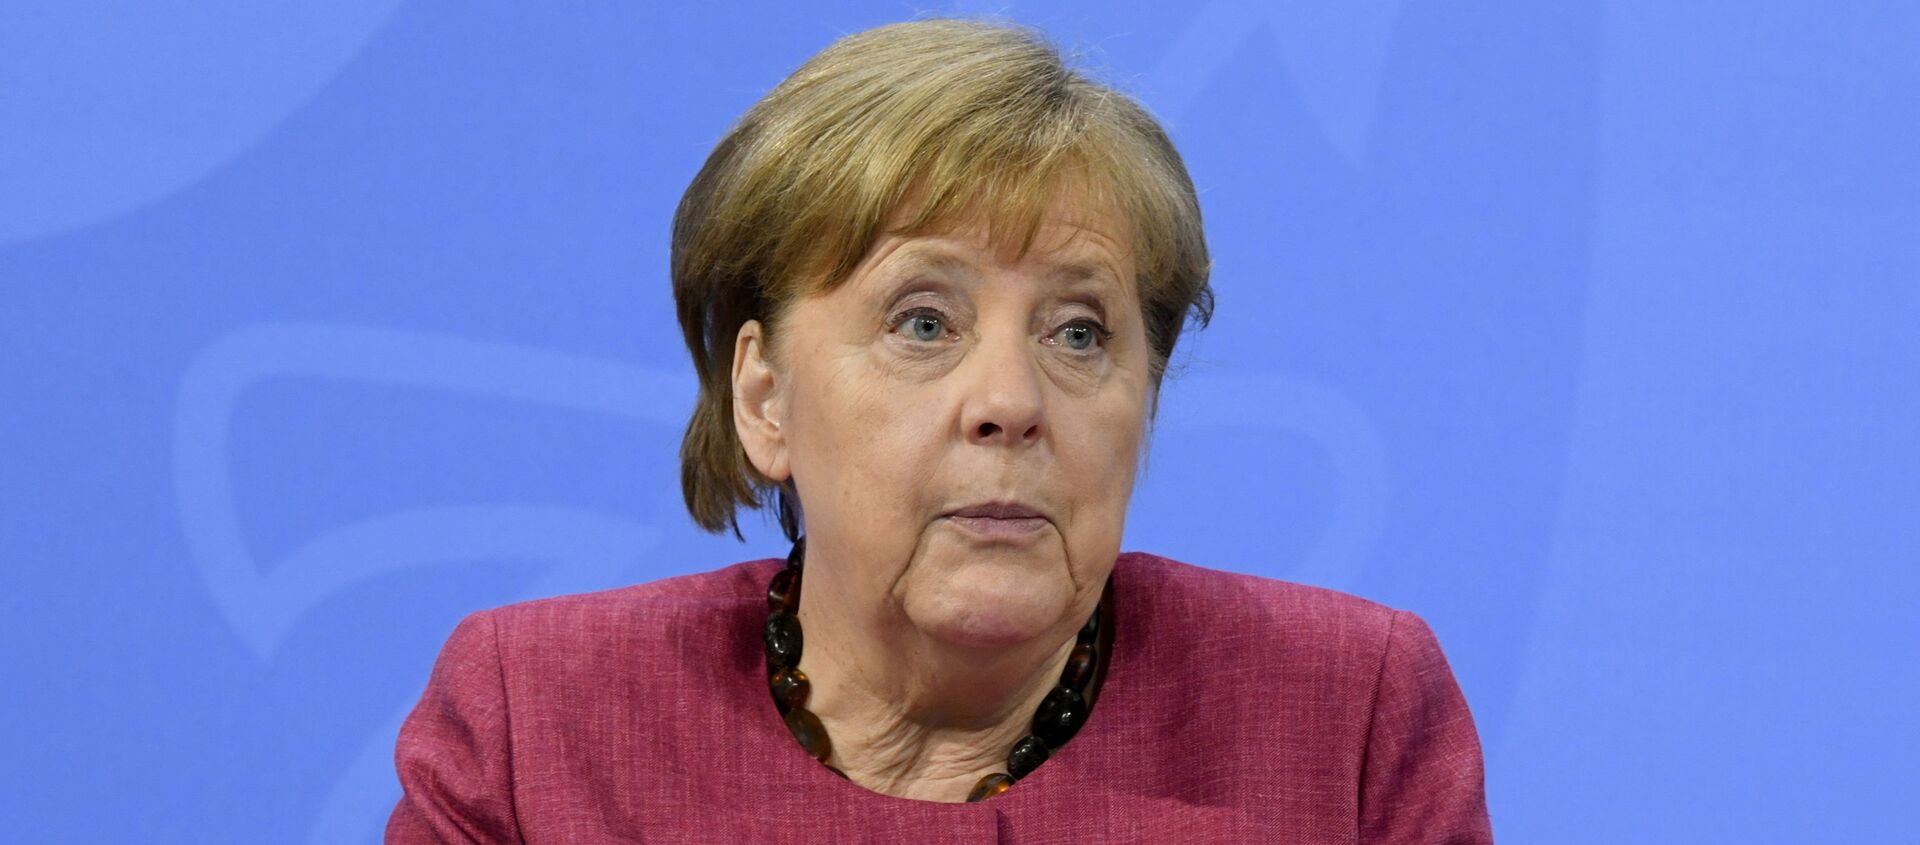 German Chancellor Angela Merkel attends a news conference at the Chancellery in Berlin, Germany May 27, 2021.  - Sputnik International, 1920